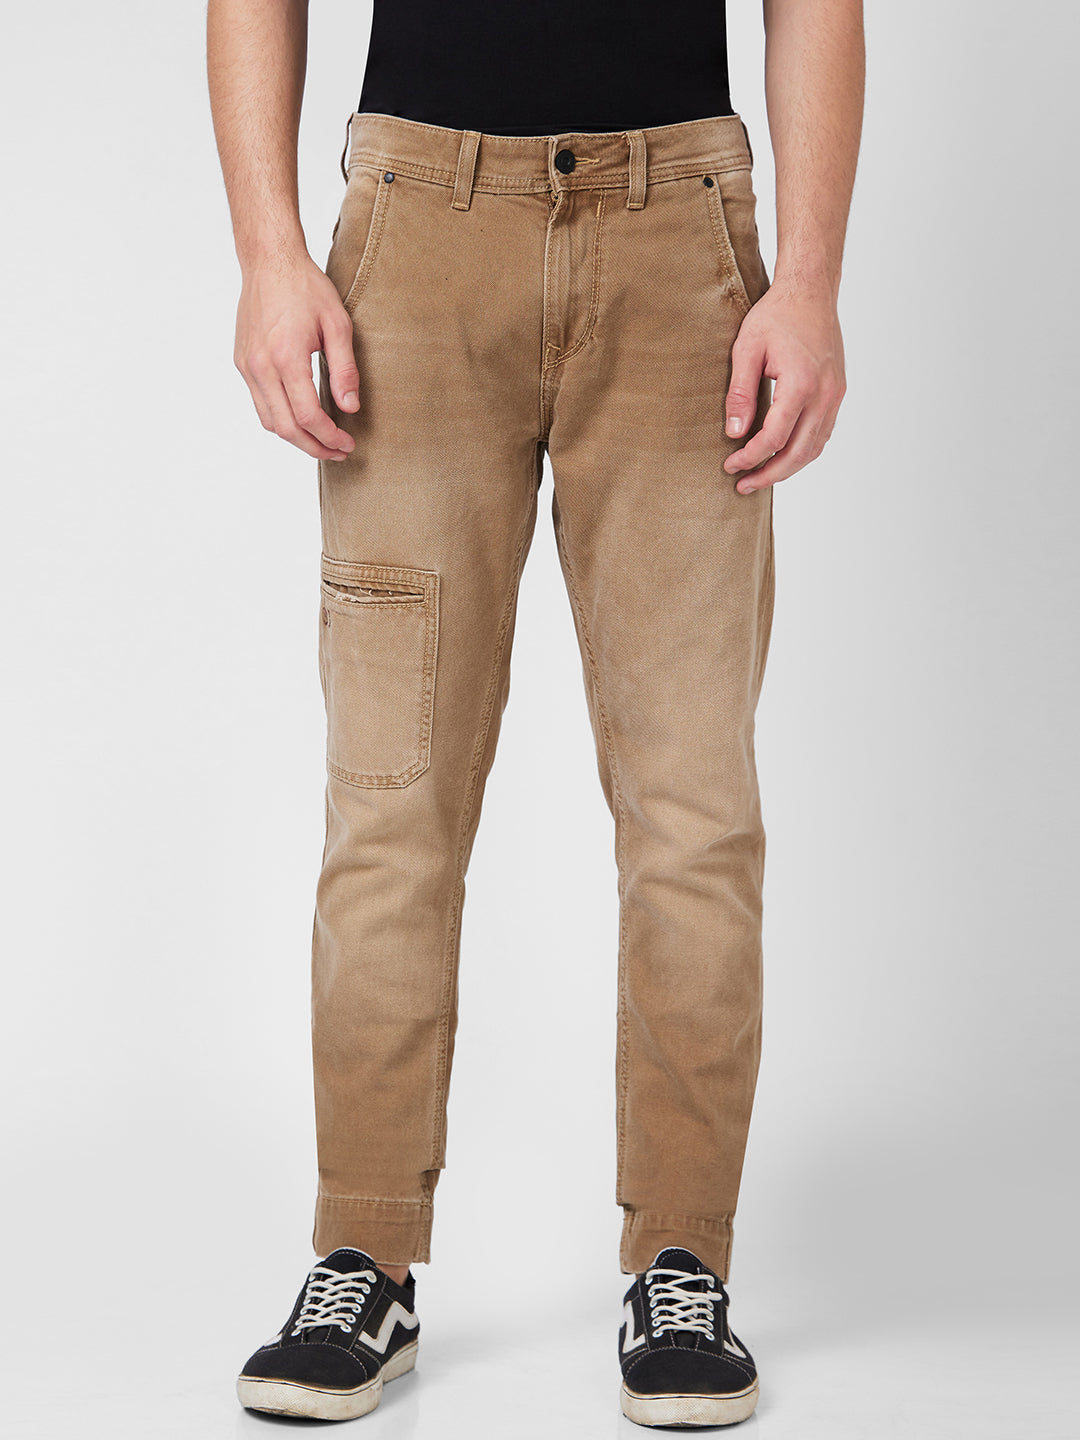 Dockers Comfort Khaki Mens Relaxed Fit Pleated Pant - JCPenney